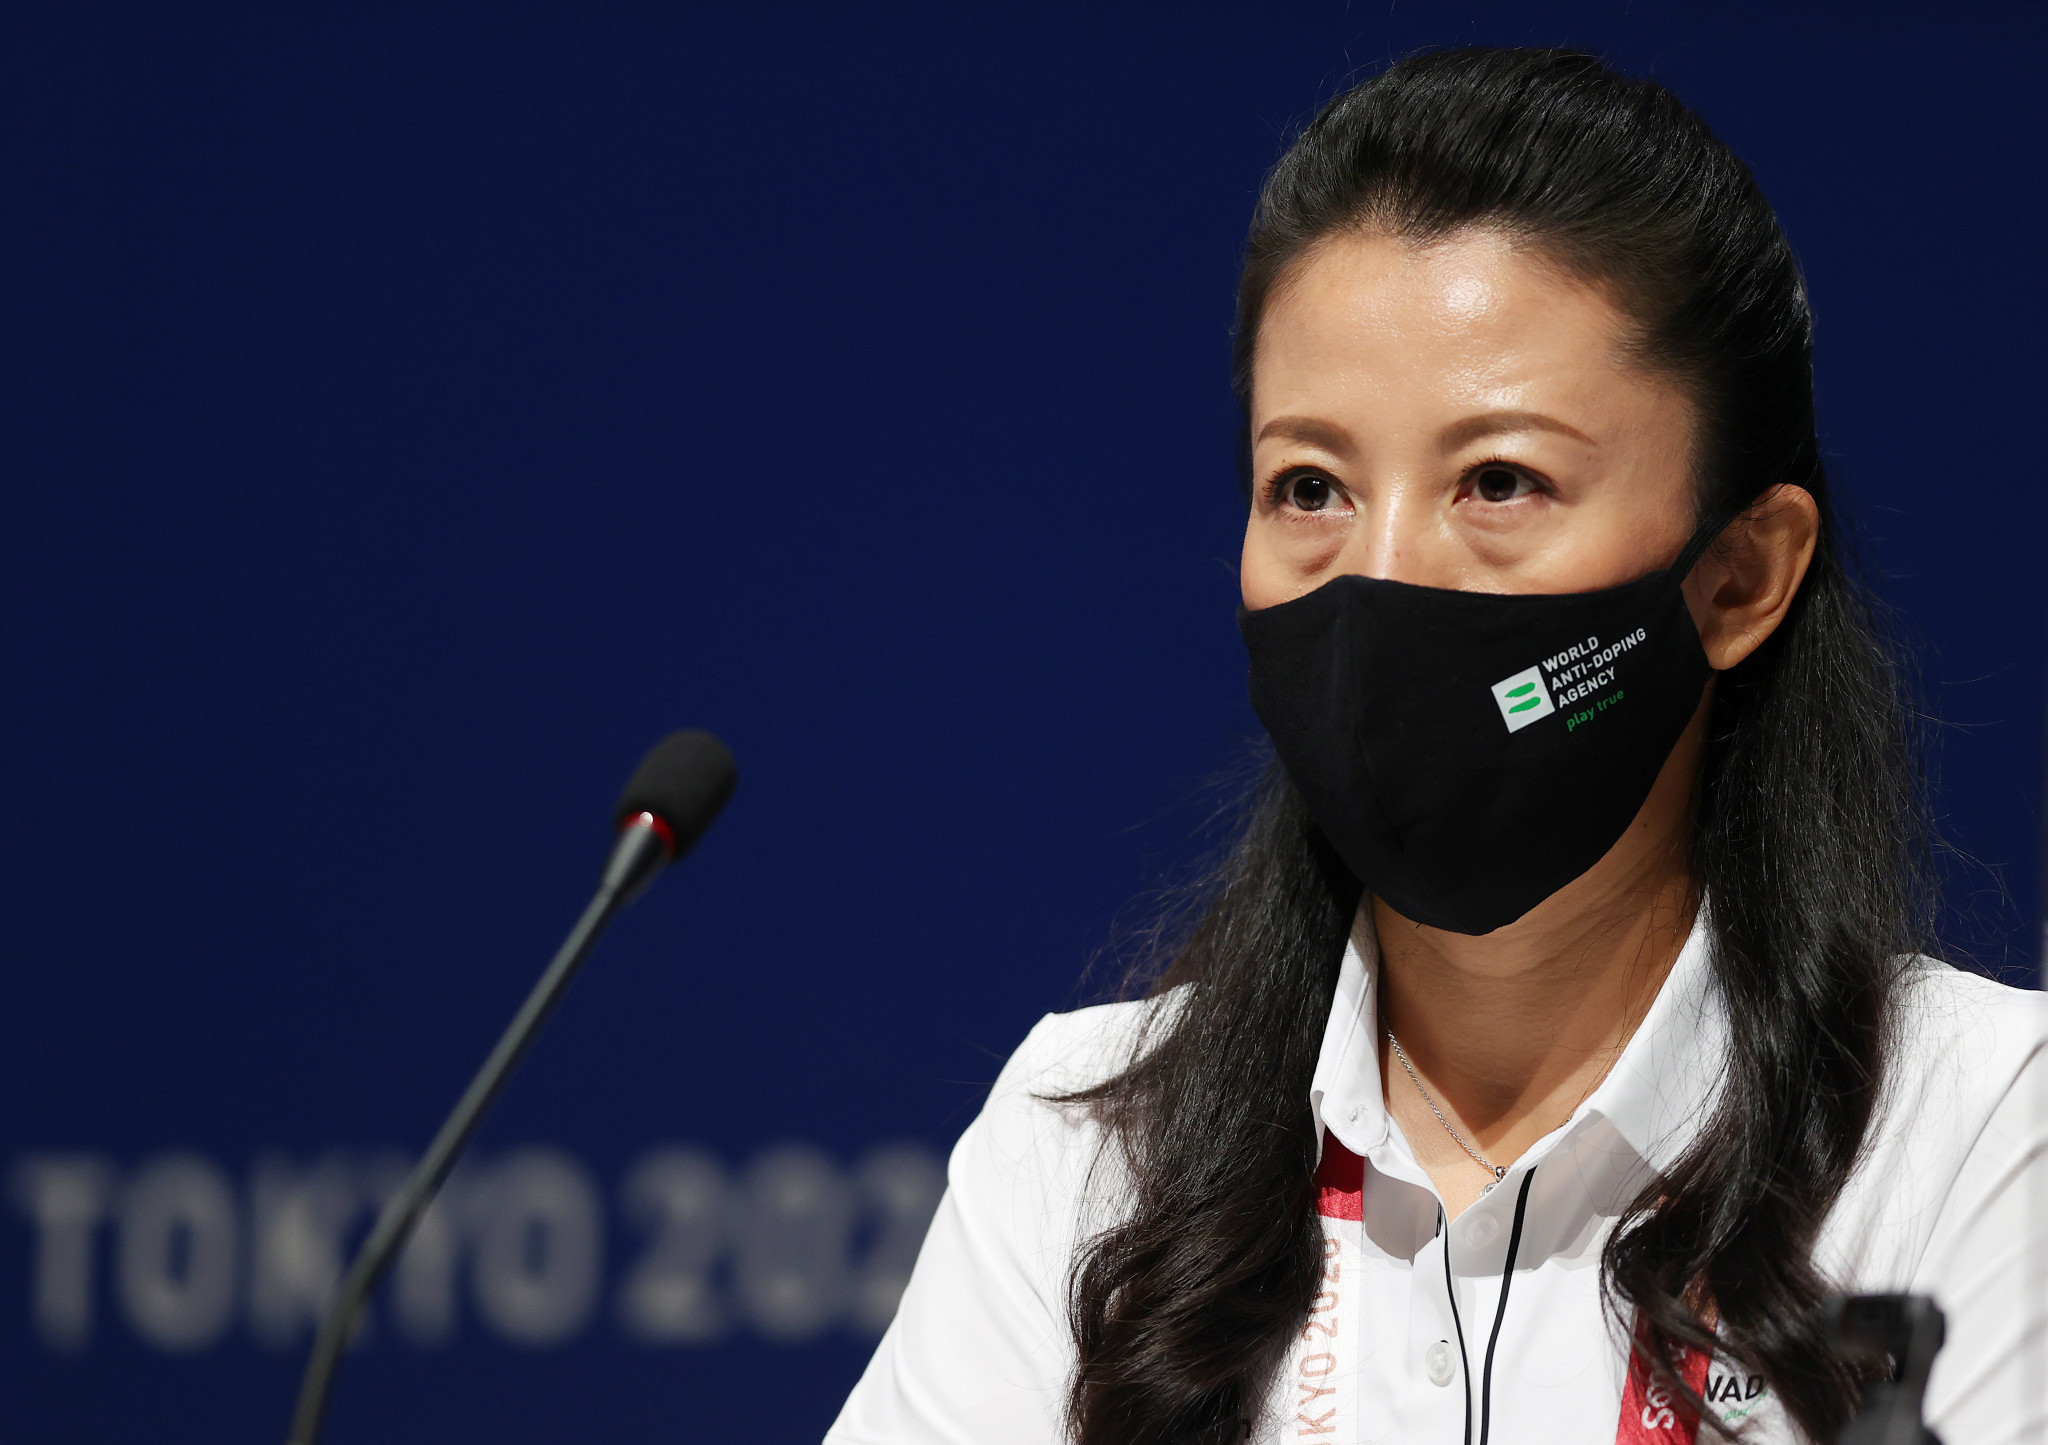 Olympic speed skating champion Yang warns athletes they are "responsible" for opinions at Beijing 2022